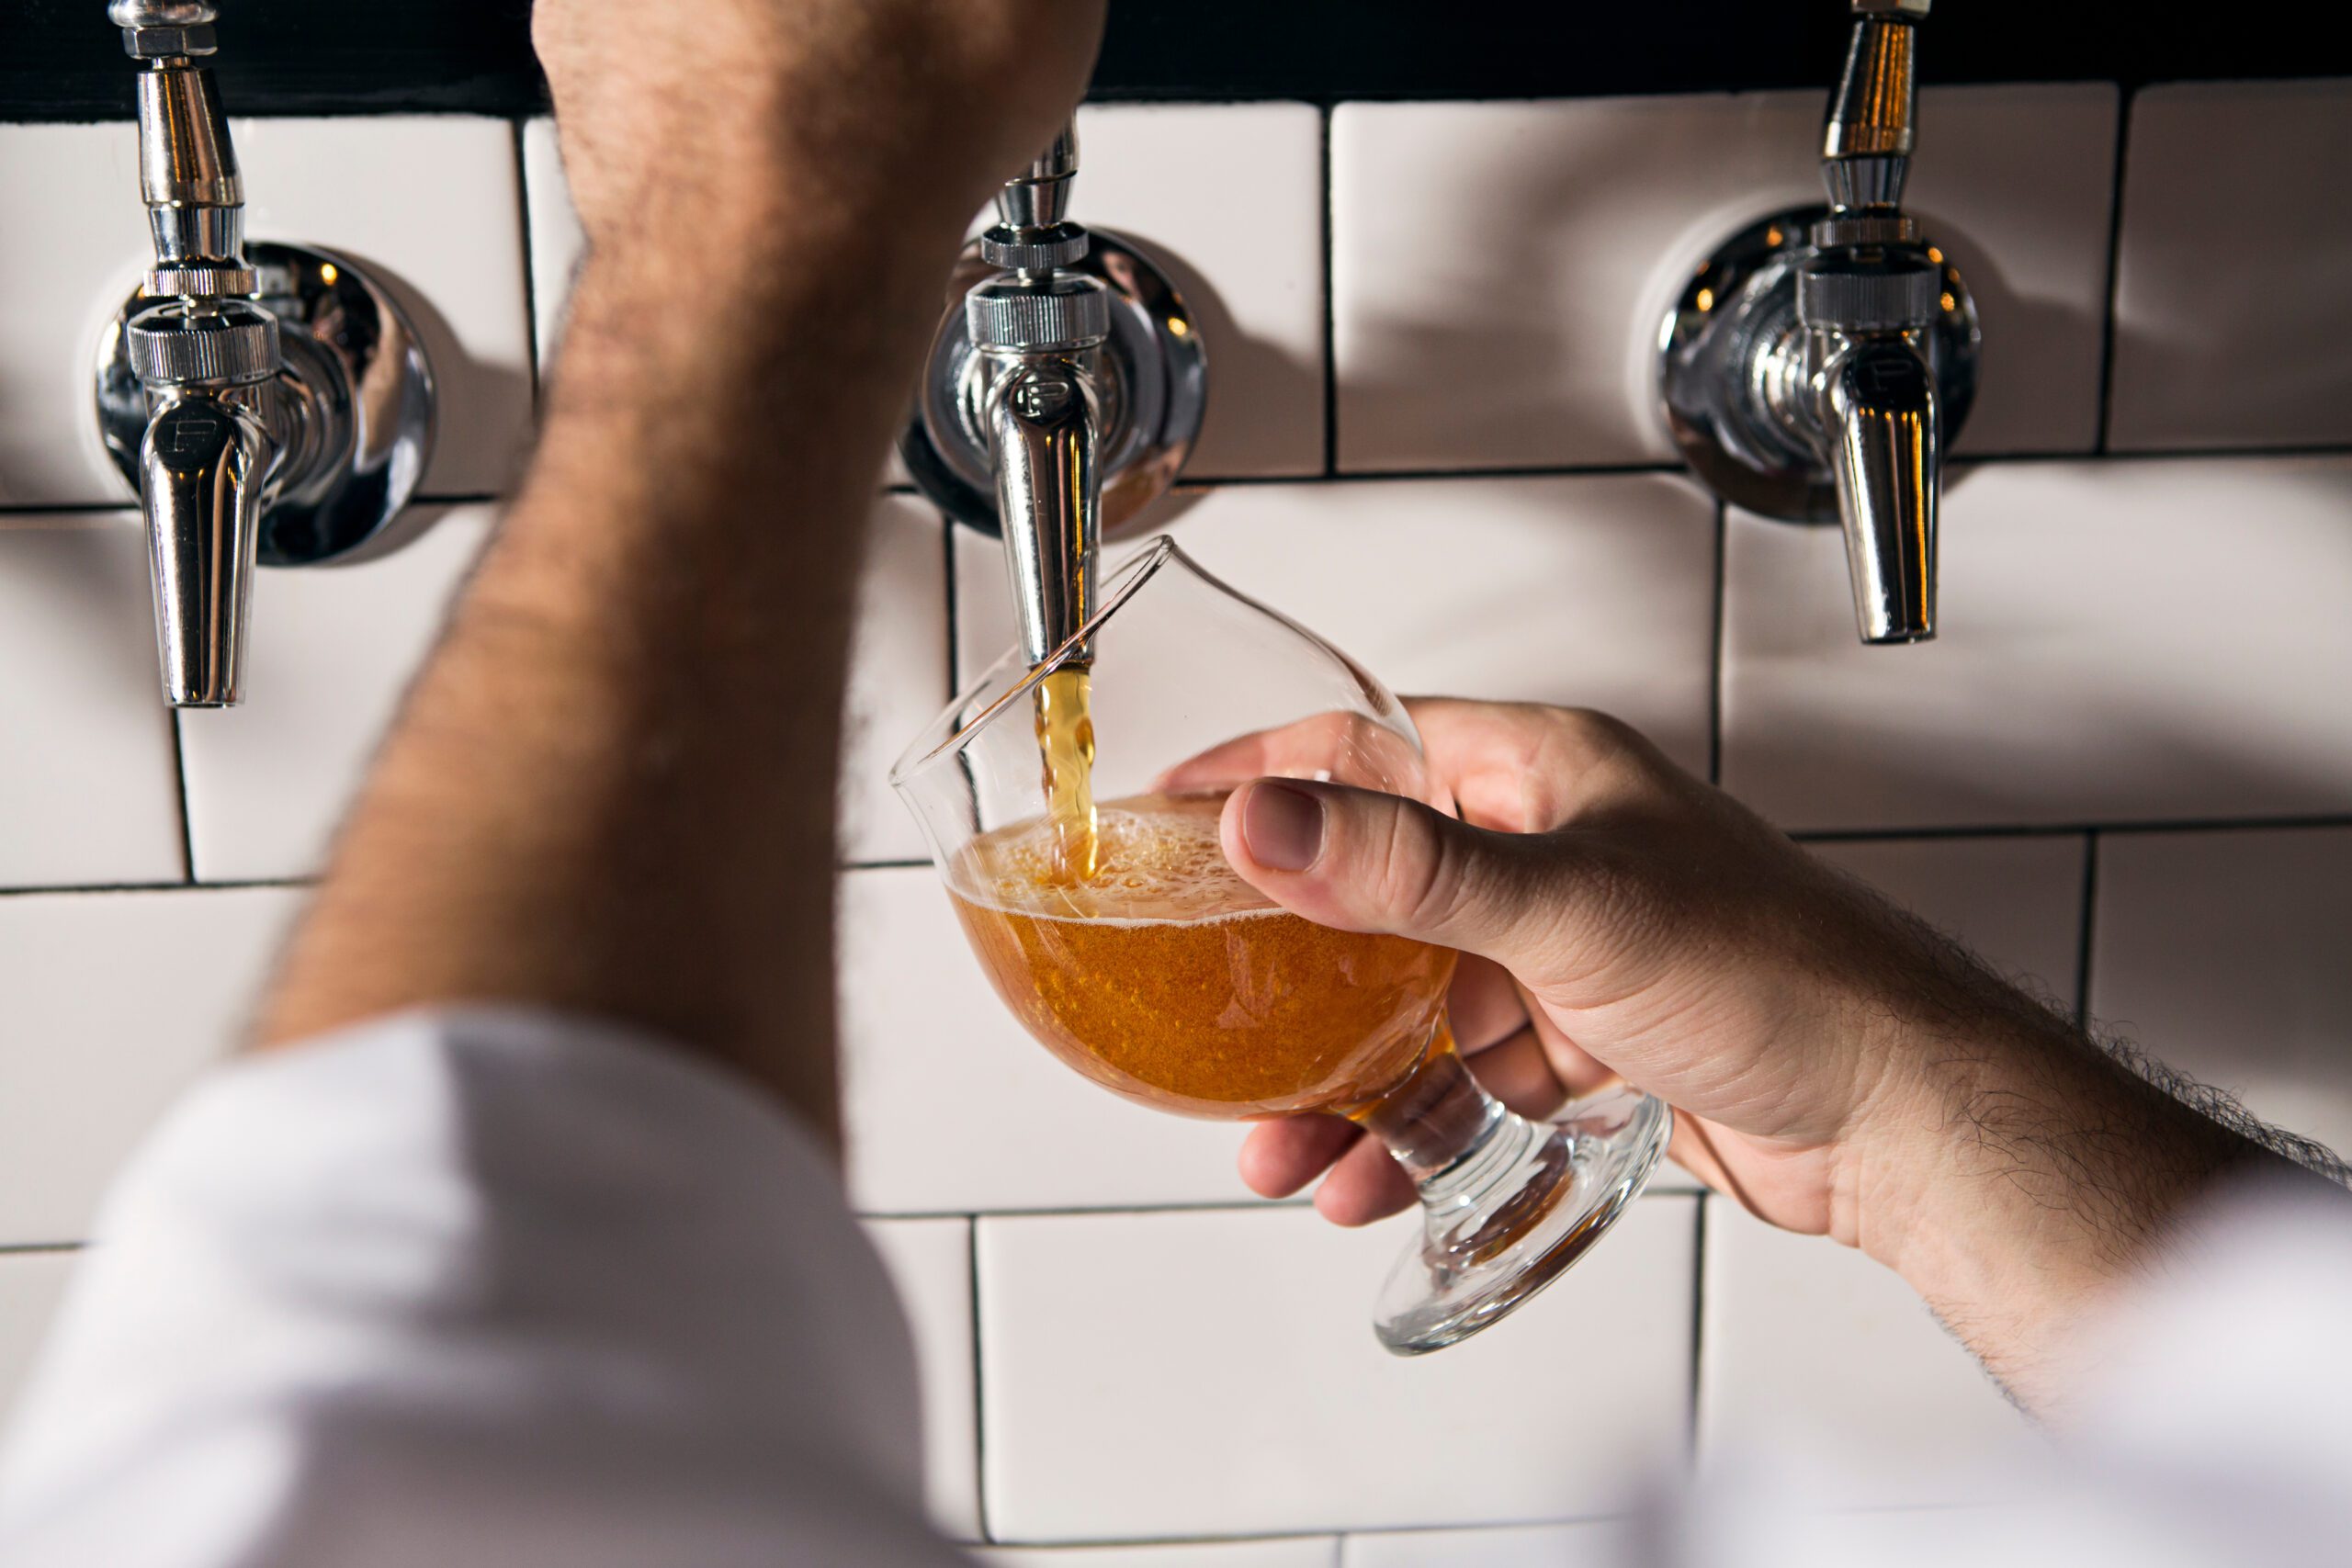 A bartender pours a beer at an upscale bar.